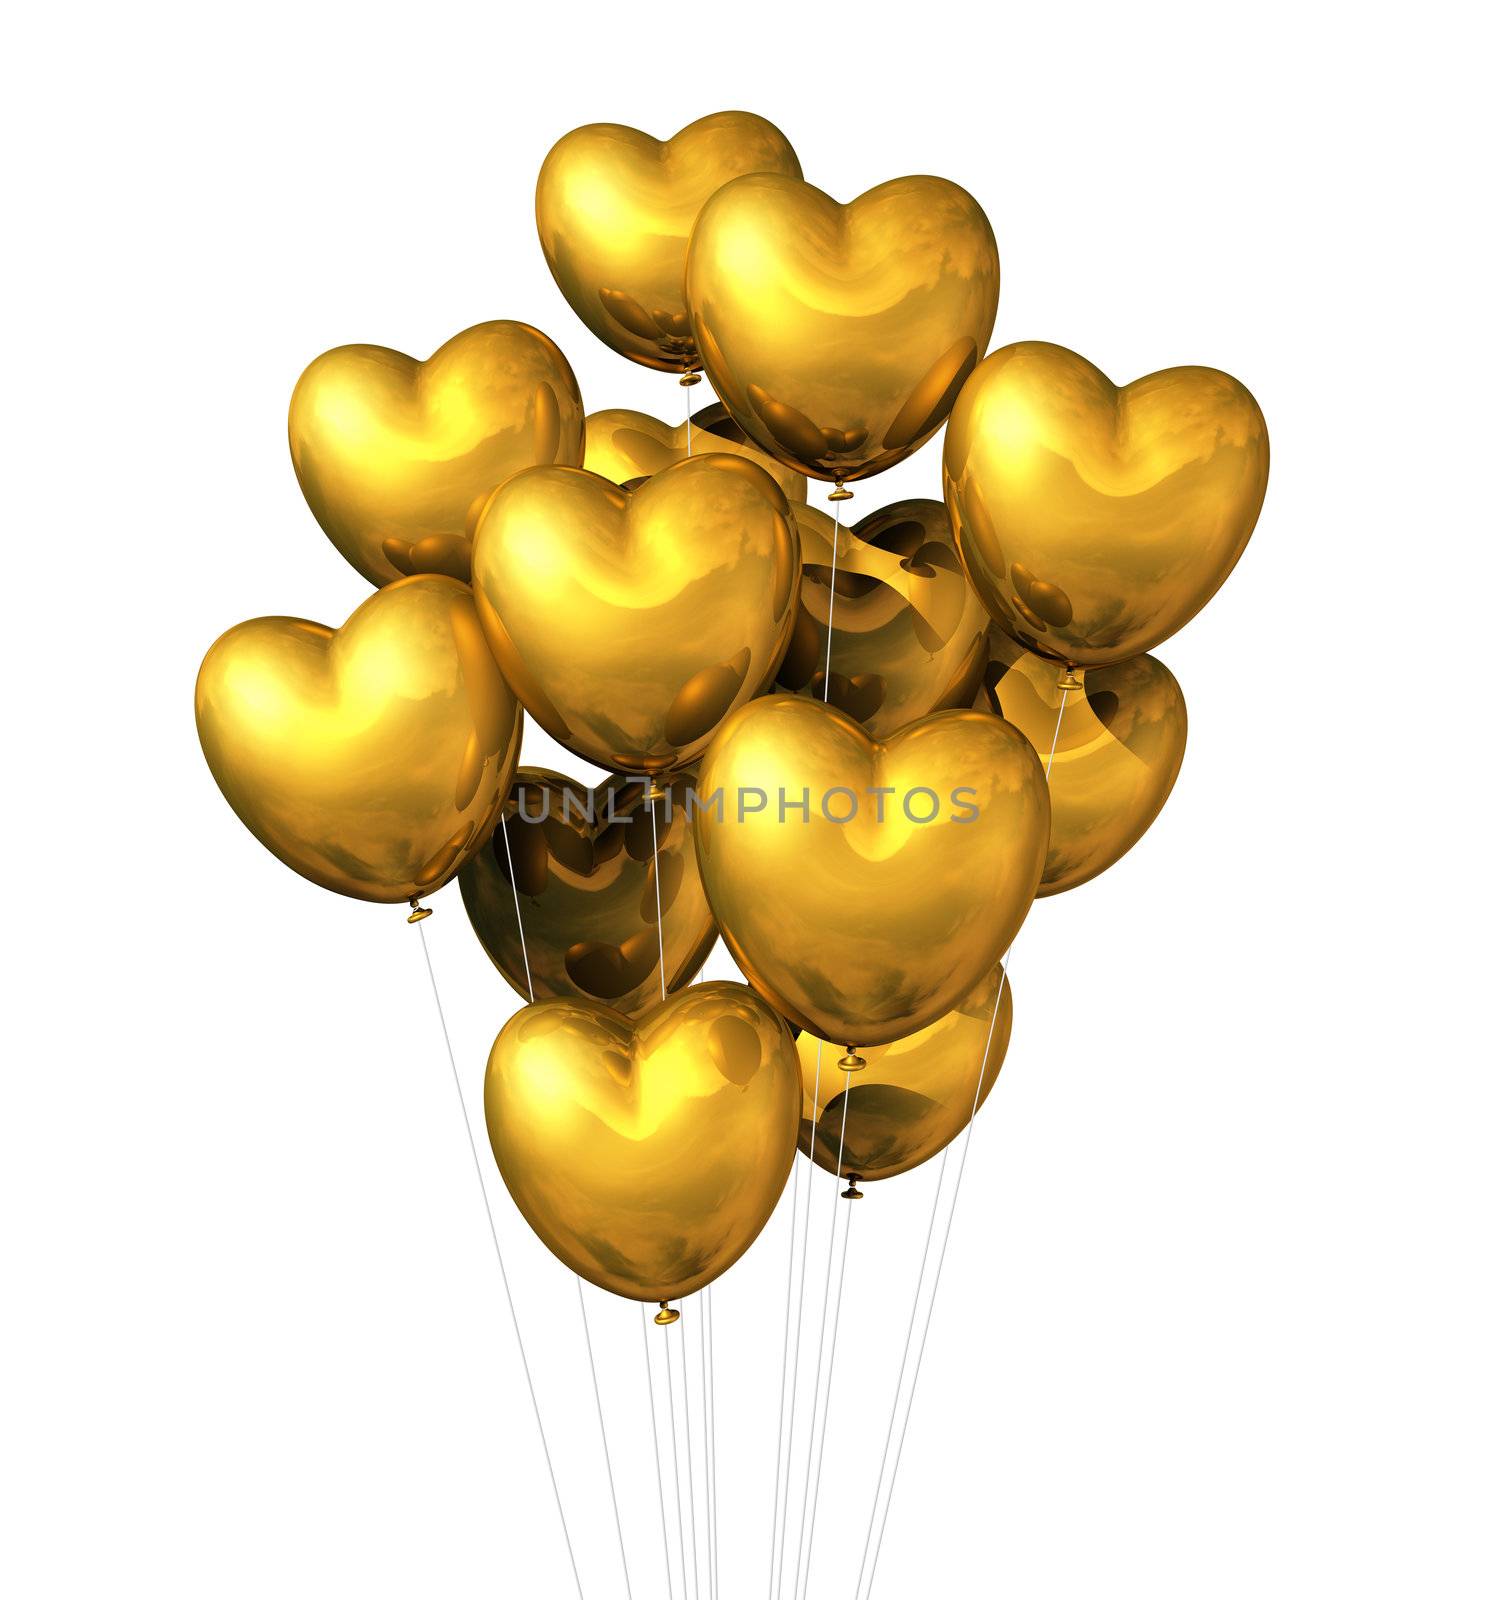 gold heart shaped balloons isolated on white by daboost